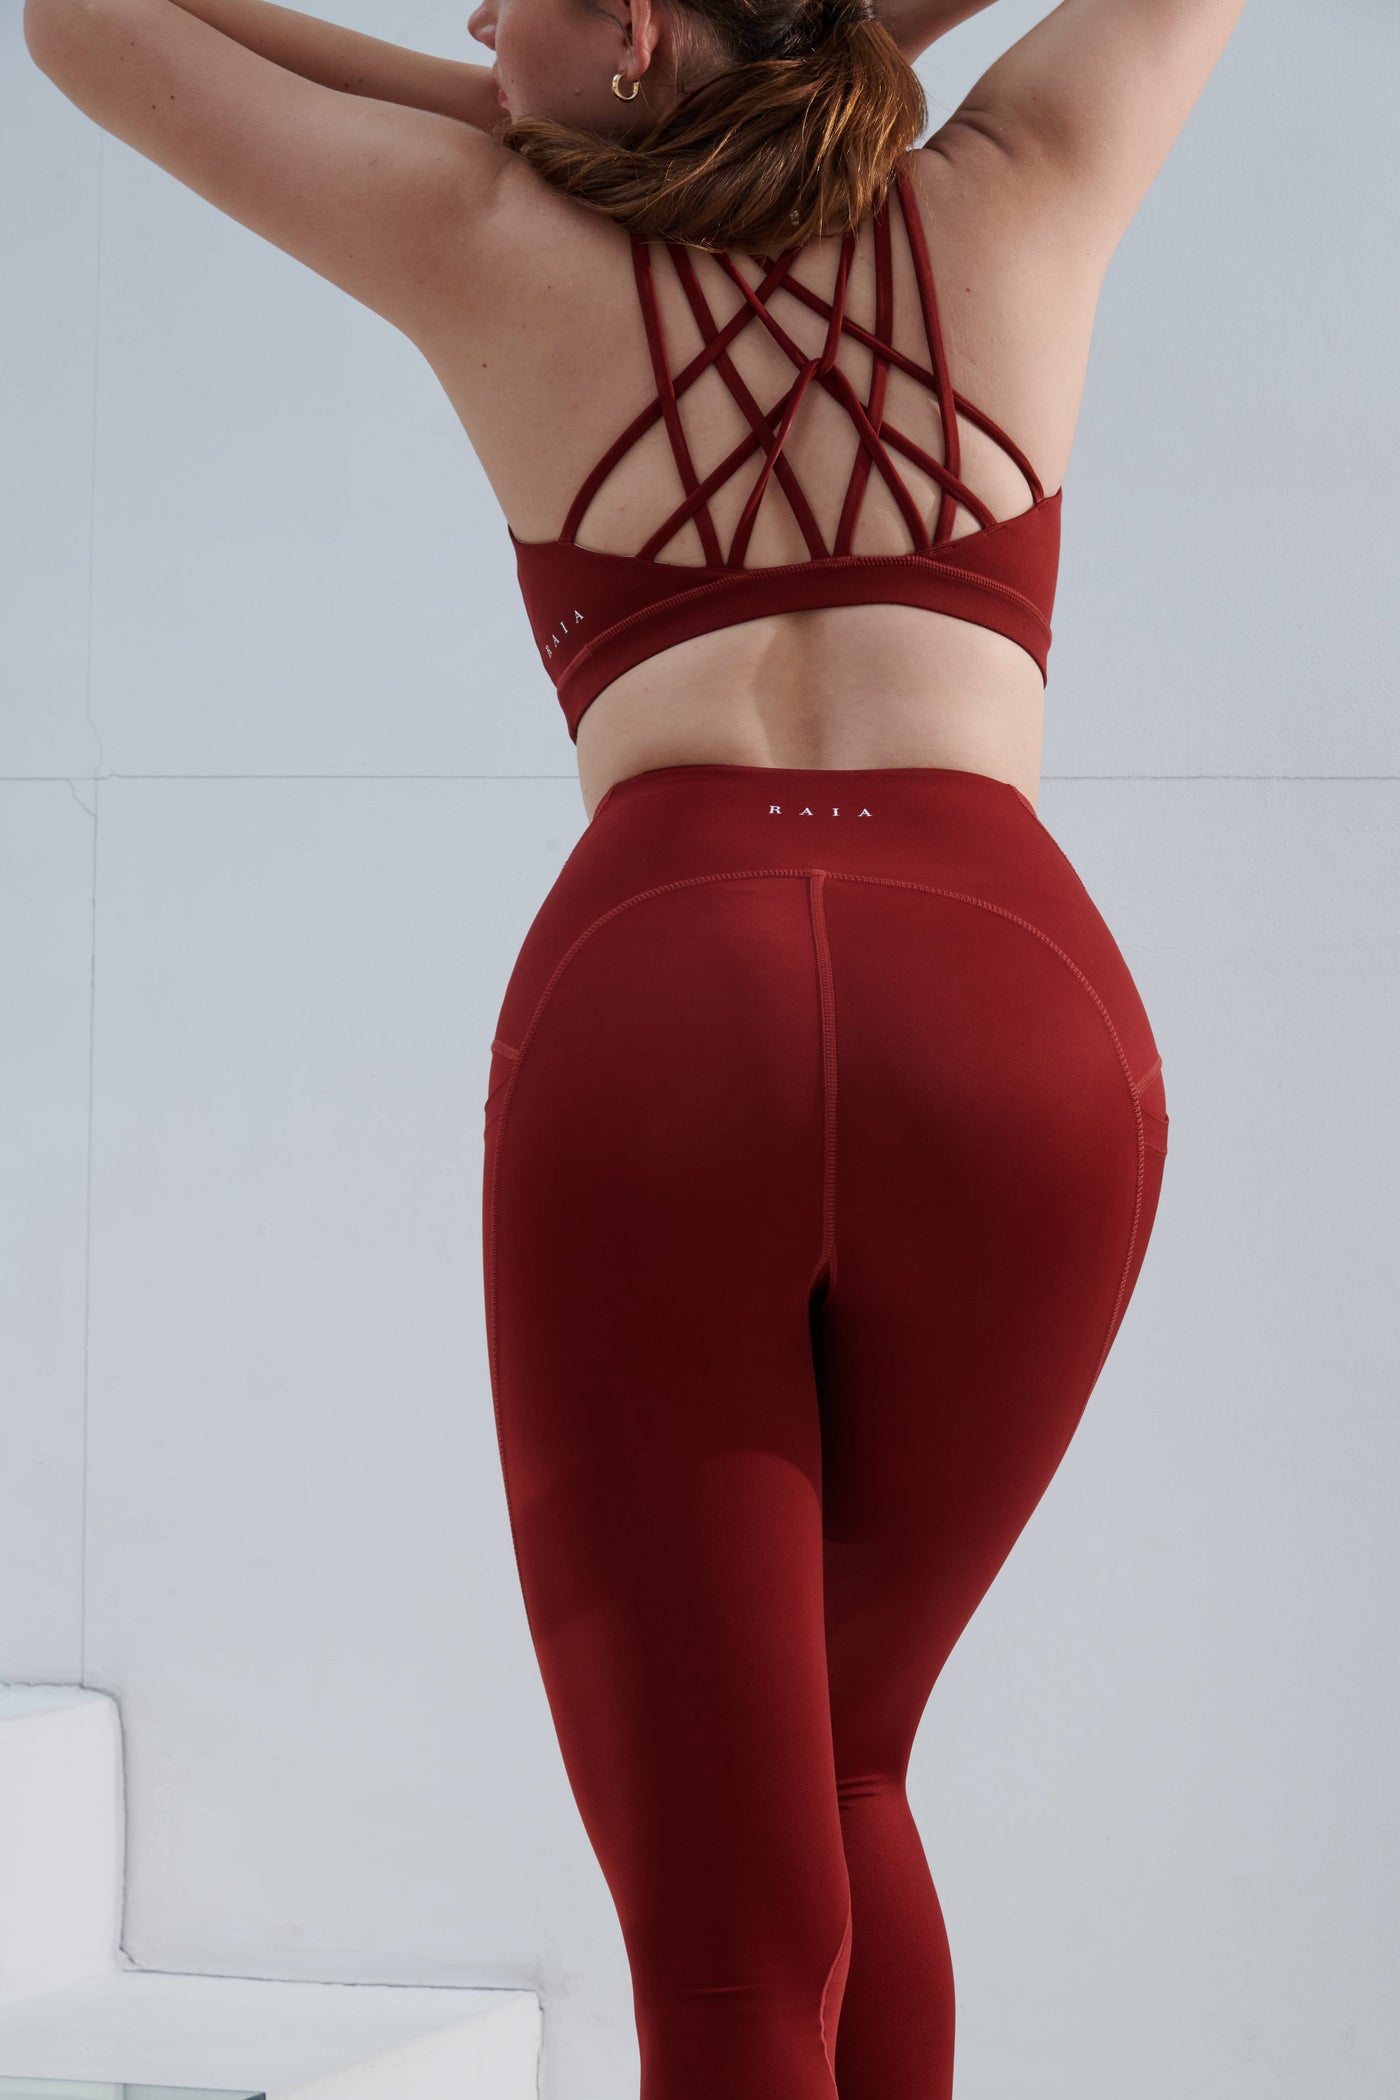 Zyia Active Brick Red Moon Laser Cut Brilliant Luxe Legging size 6/8